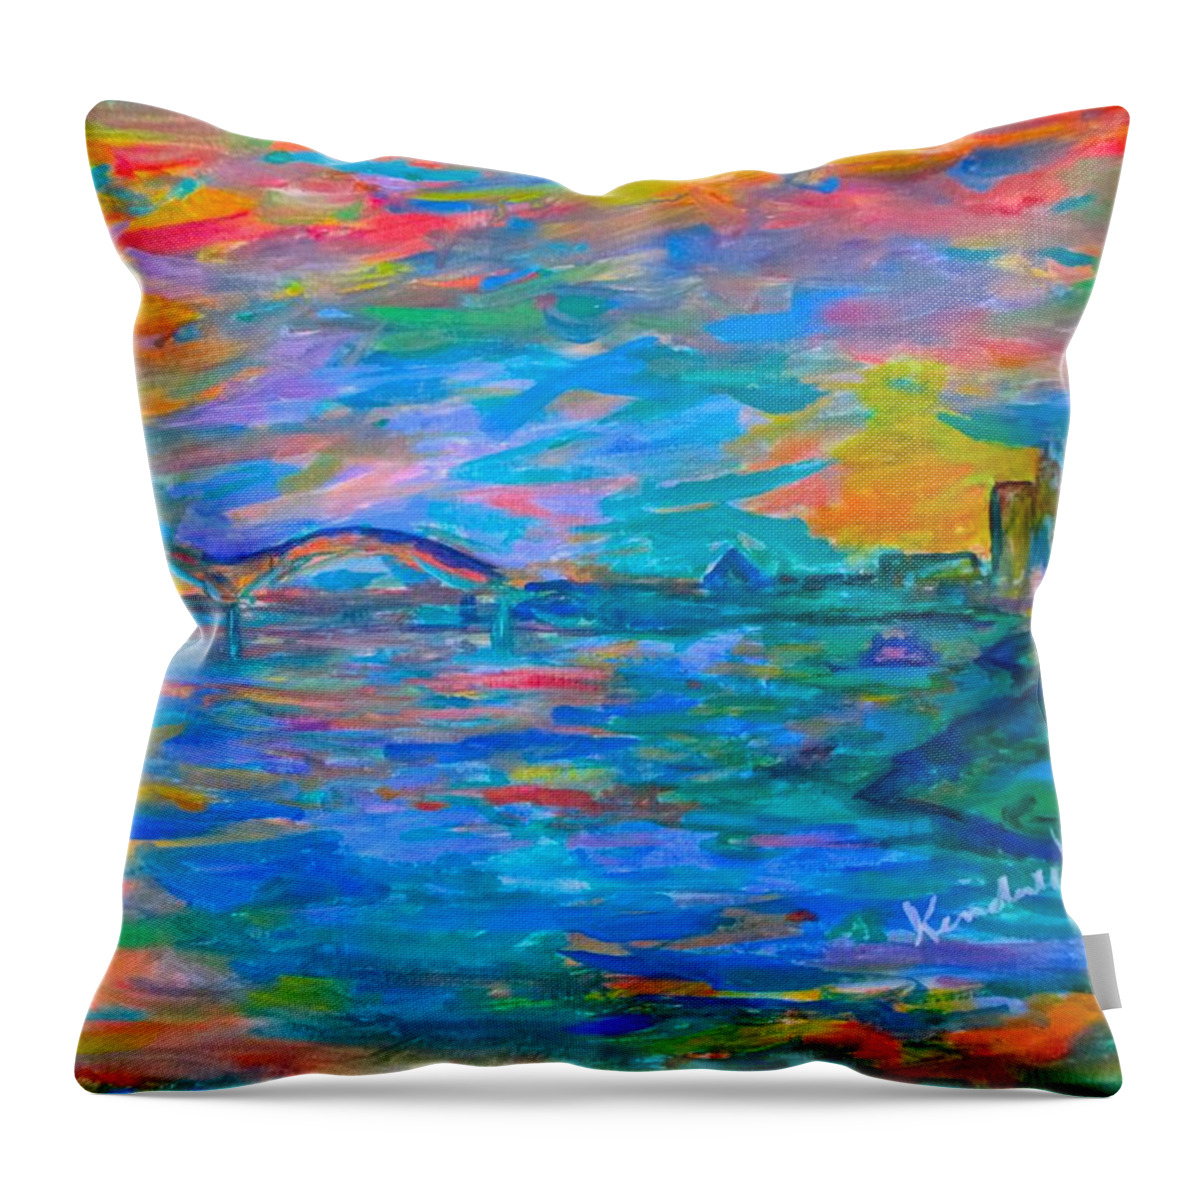 Memphis Throw Pillow featuring the painting Memphis Edge by Kendall Kessler